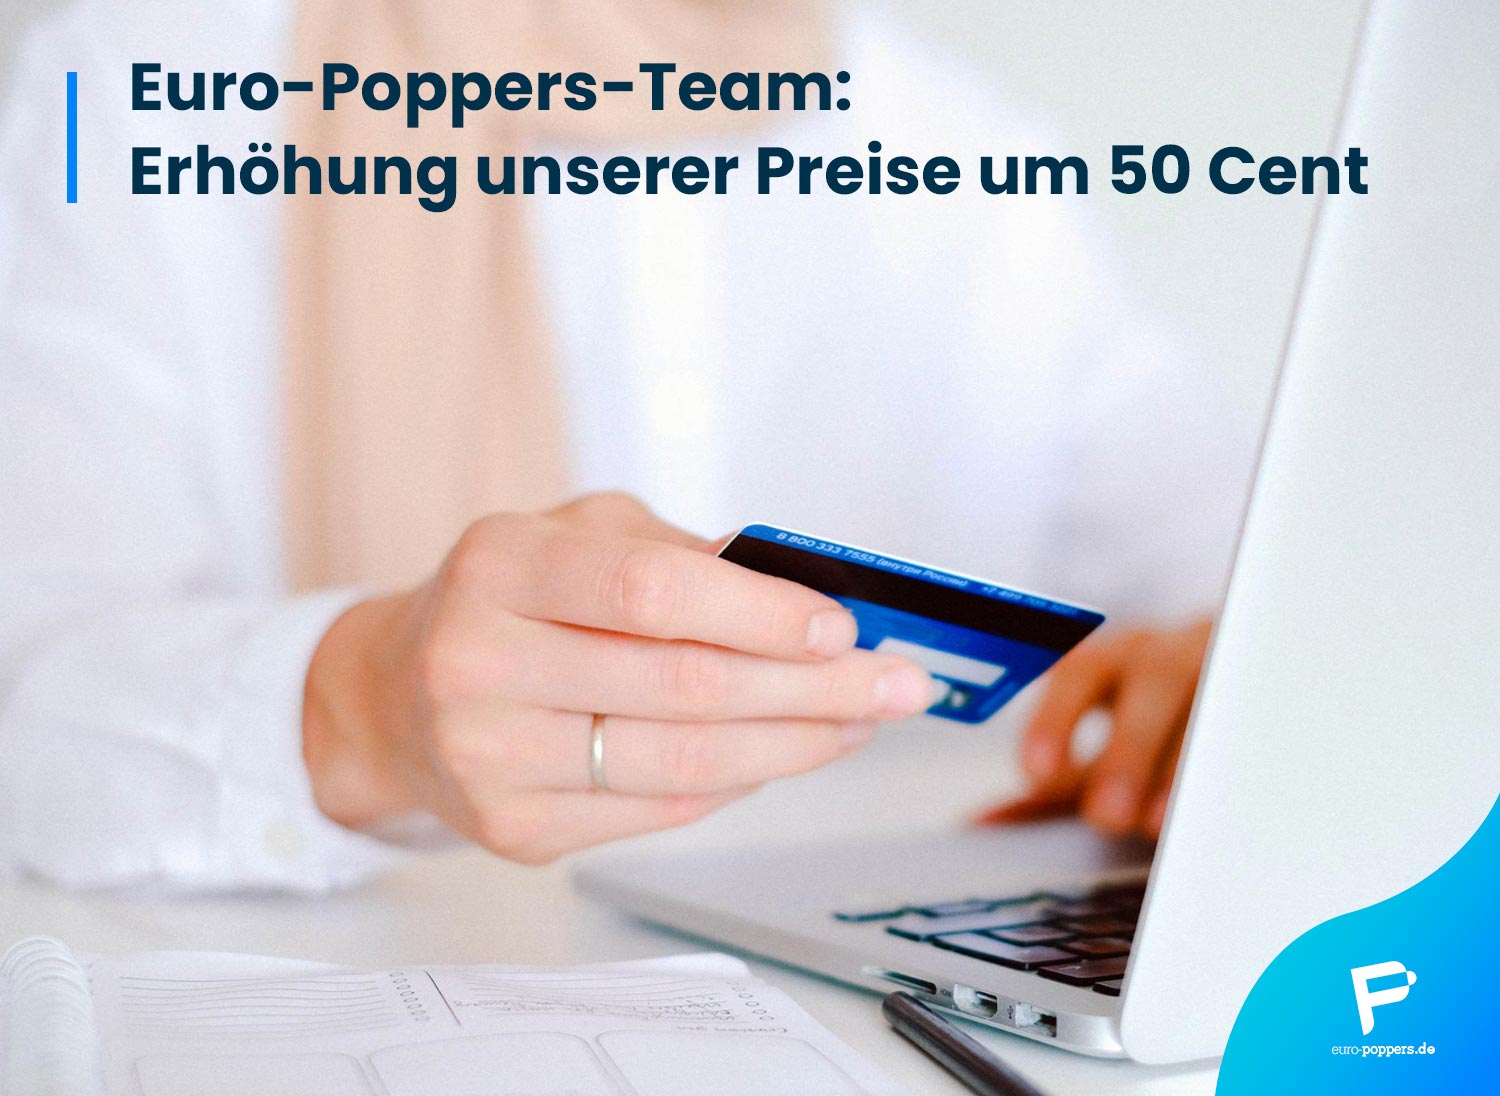 You are currently viewing Euro-Poppers-Team: Erhöhung unserer Preise um 50 Cent